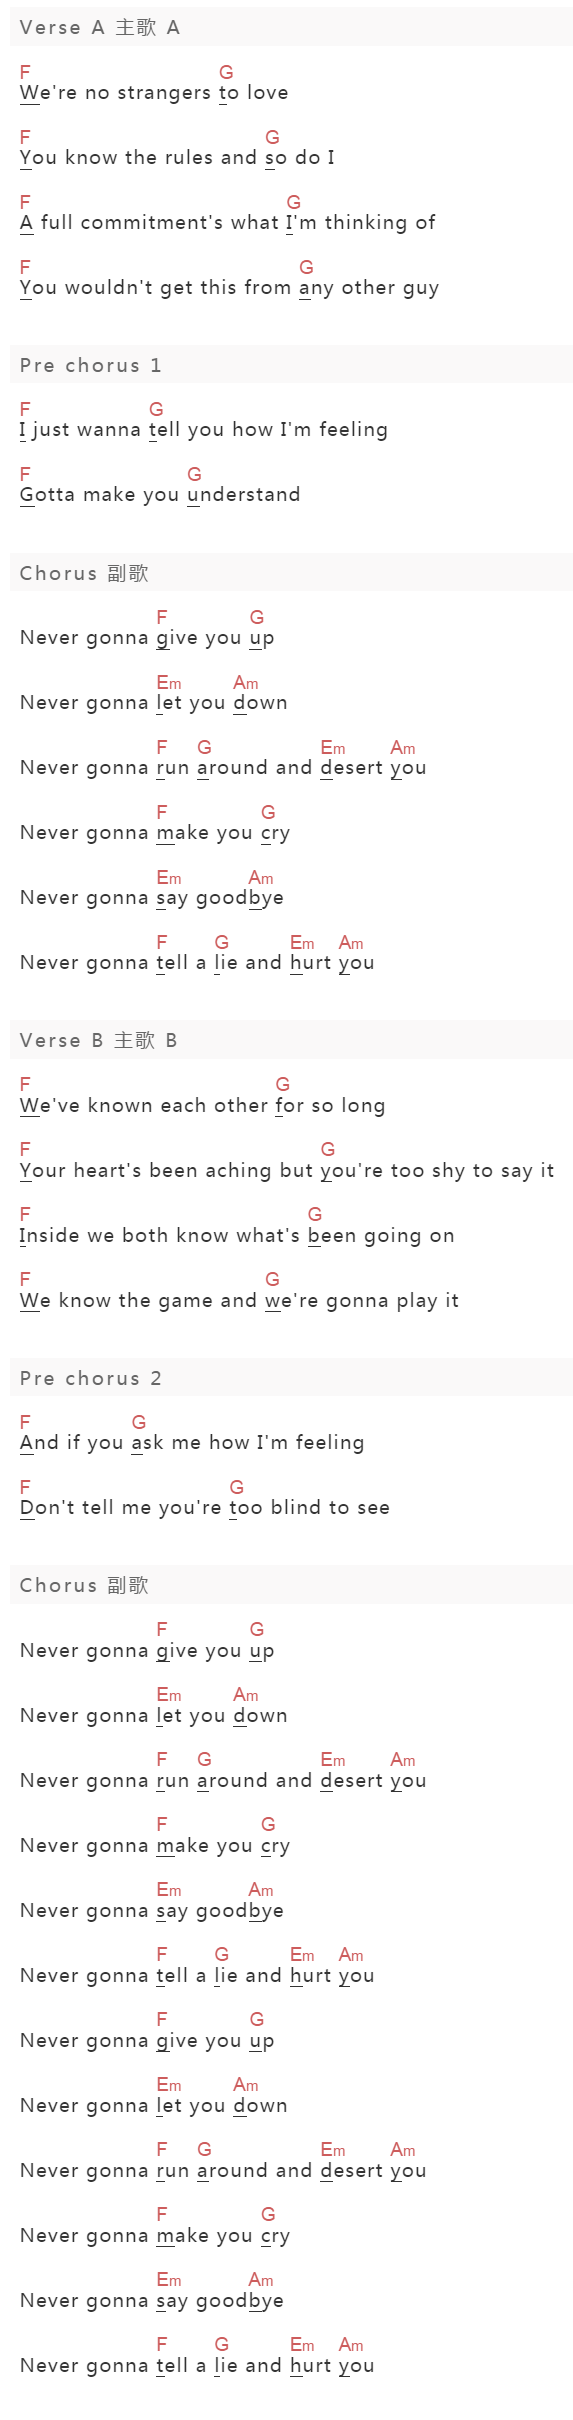 Rick Astley《Never Gonna Give You Up》吉他谱C调和弦谱(txt)1